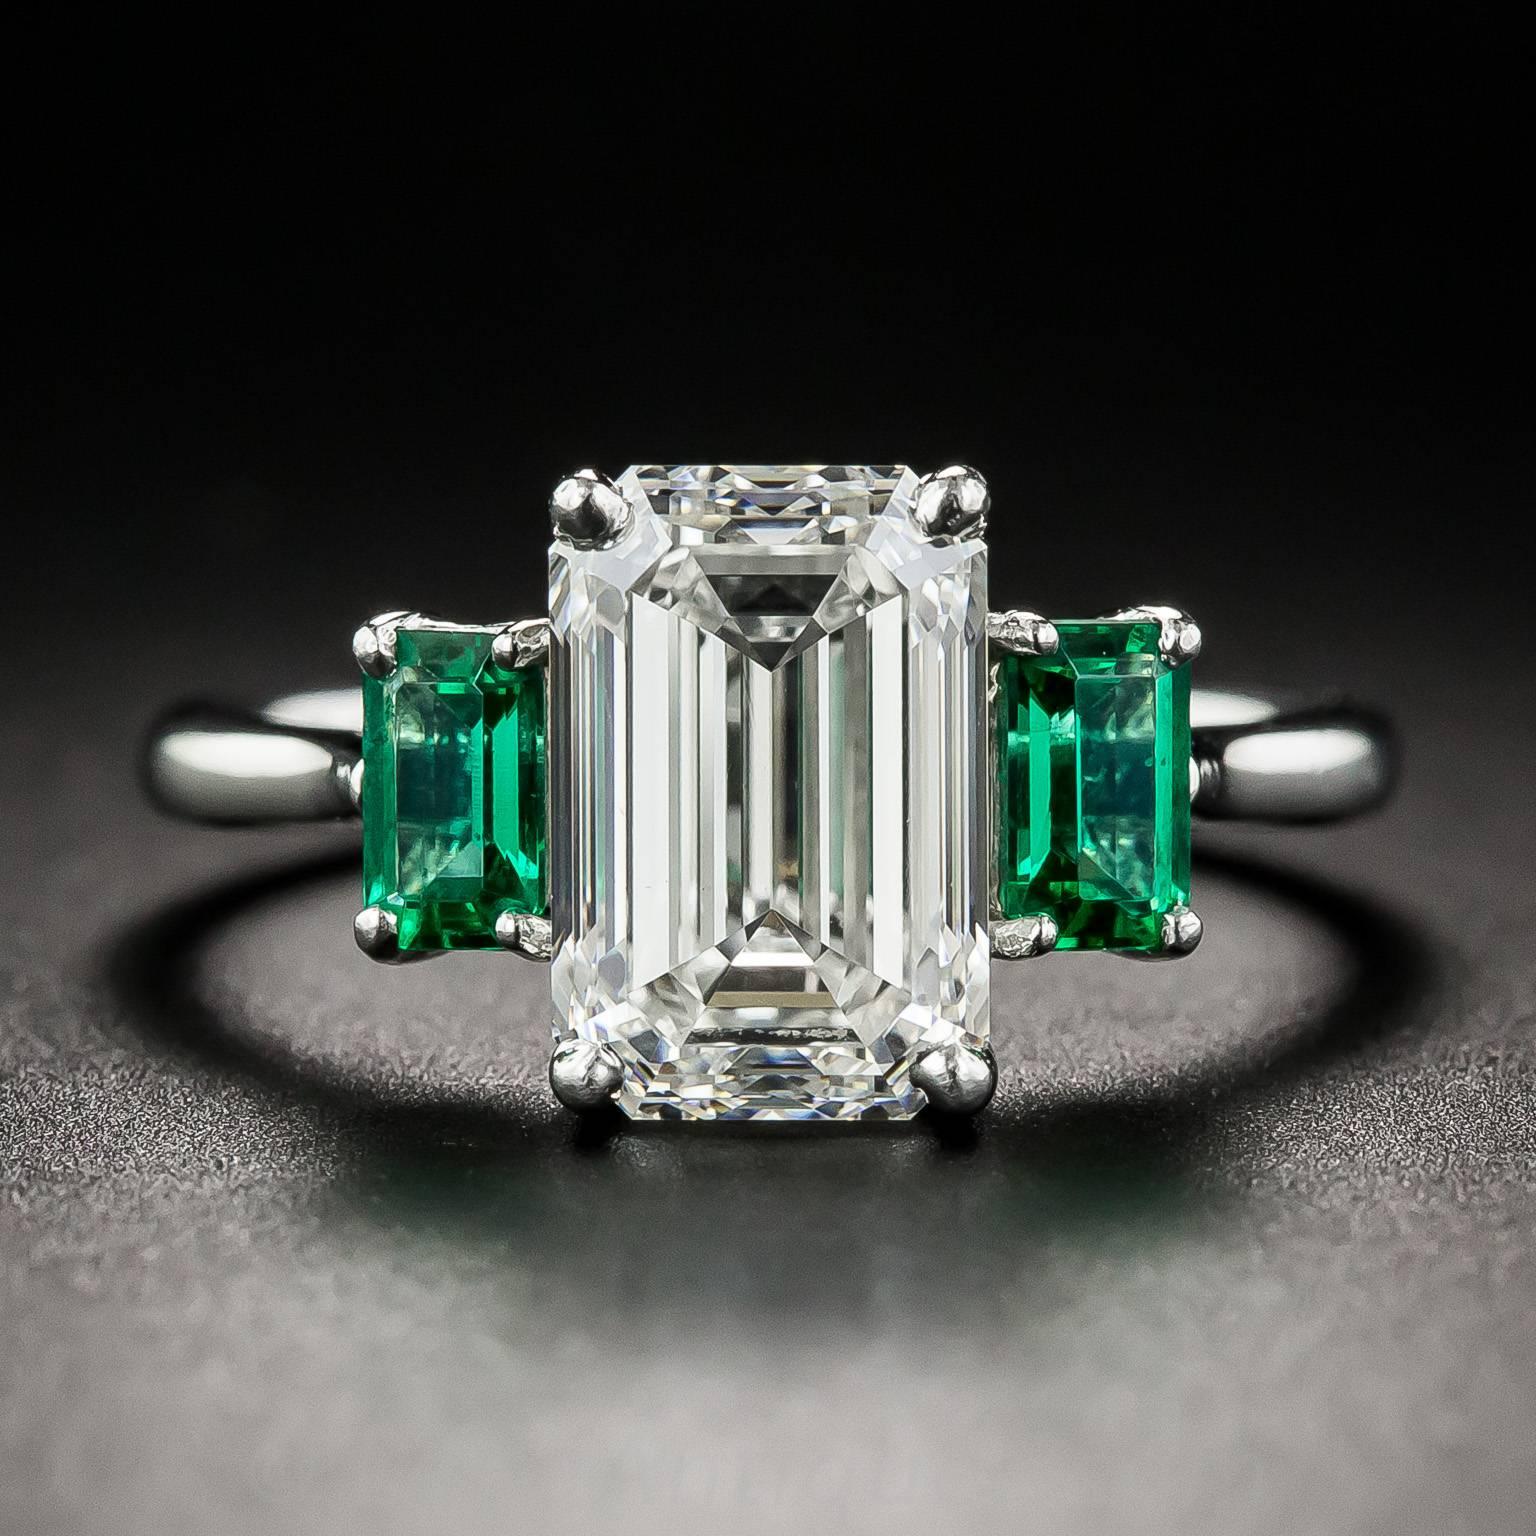 A beautiful bright white, high-quality emerald-cut diamond, weighing 3.01 carats, takes center stage in this resplendent, radiant and ravishing jewel. The classically modeled diamond sparkles between a rare and gemmy matched pair of of vibrant